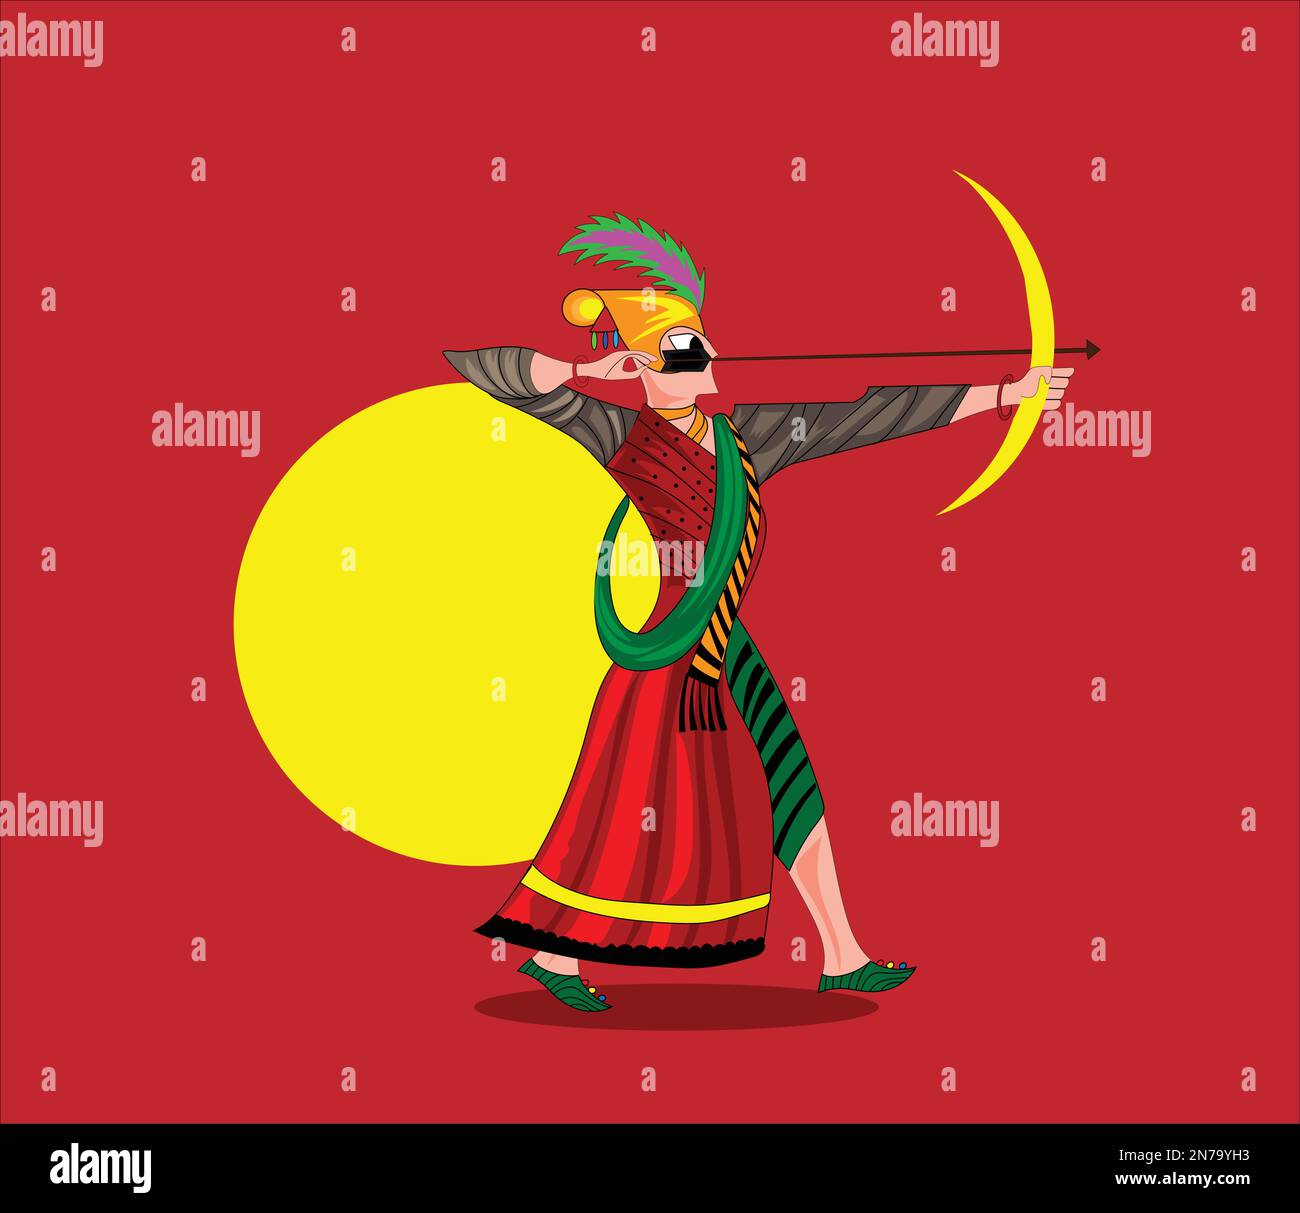 Mughal empire man vector illustration on background Stock Vector